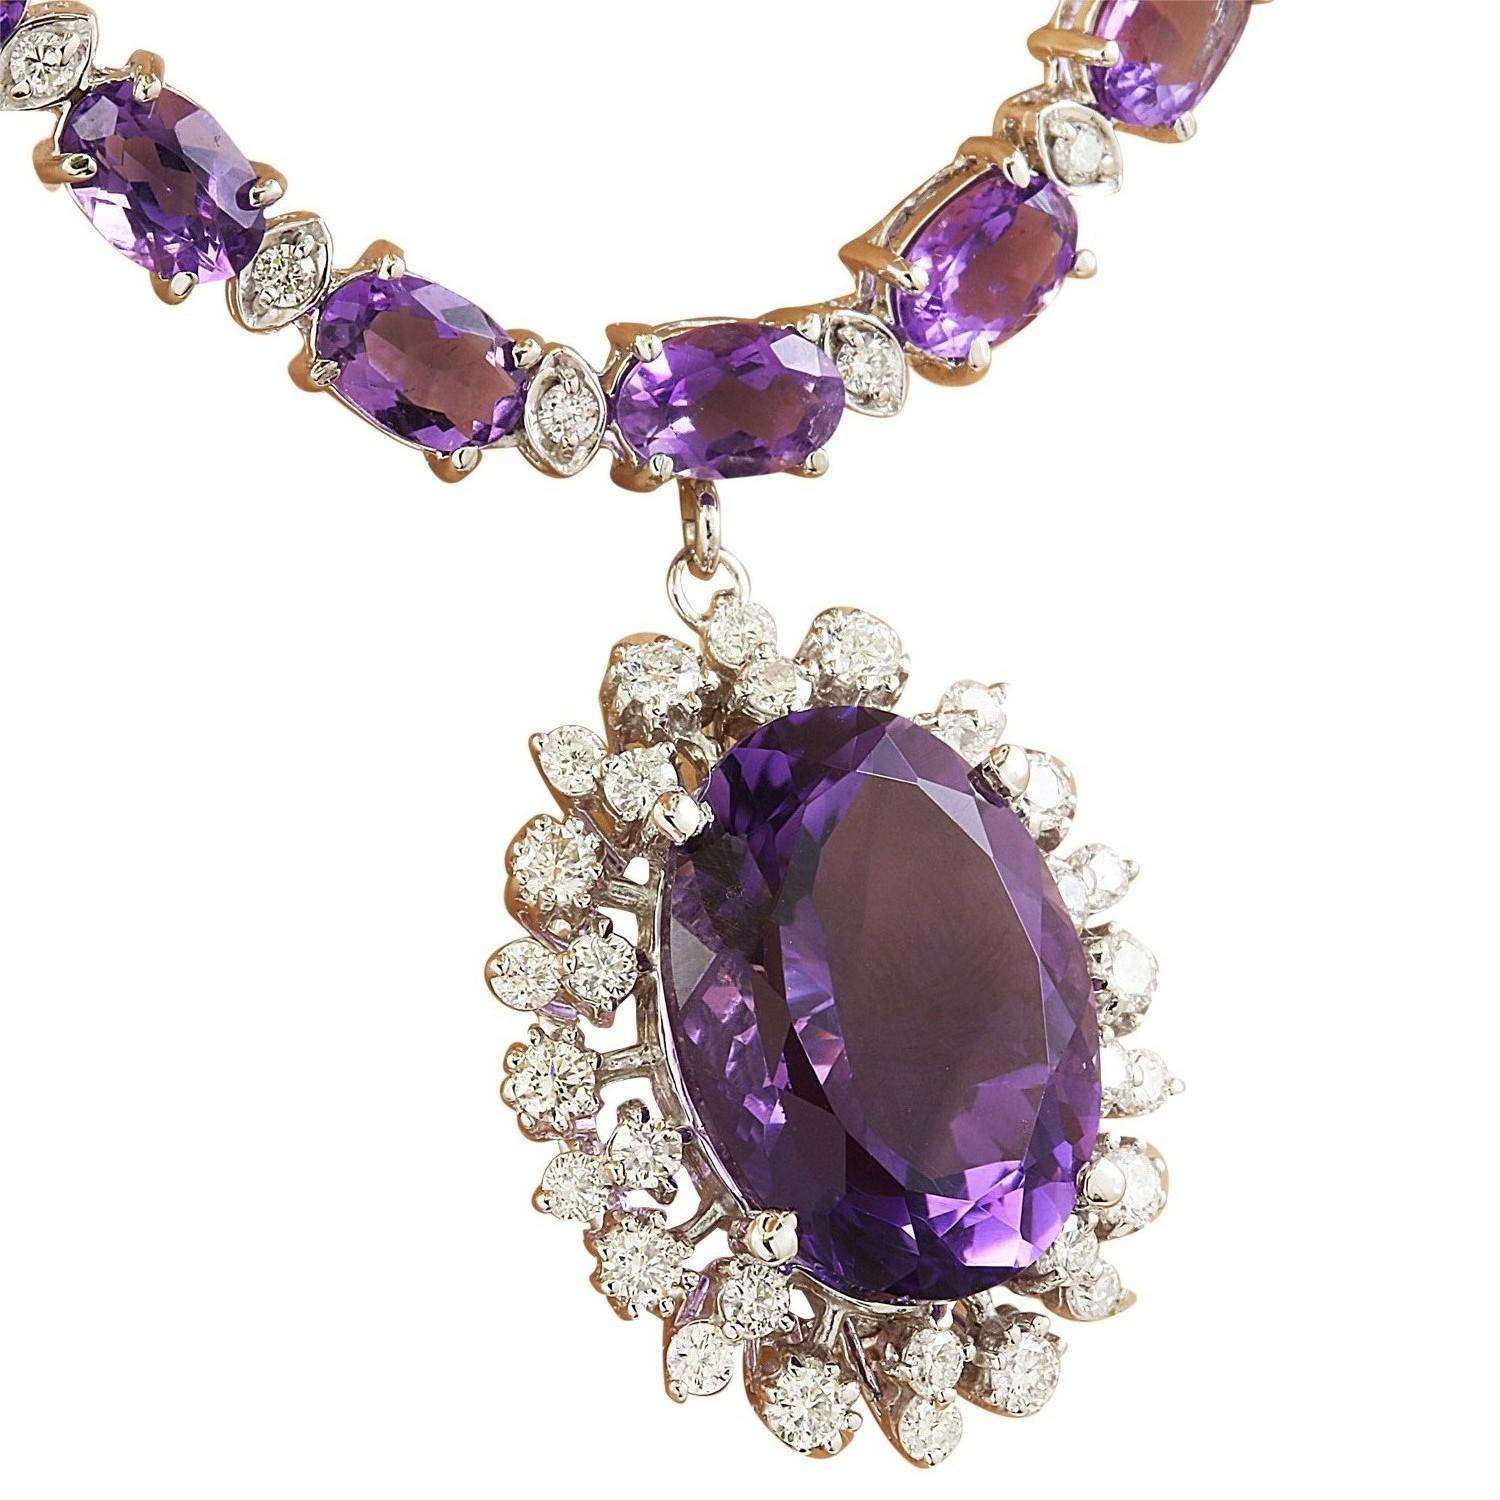 37.52 Carat Natural Amethyst 14 Karat Solid White Gold Diamond Necklace
Stamped: 14K
Total Necklace Weight: 28.2 Grams
Necklace Length: 18 Inches
Center Amethyst Weight: 9.12 Carat (16.00x12.00 Millimeters)
Side Amethyst Weight: 26.00 Carat